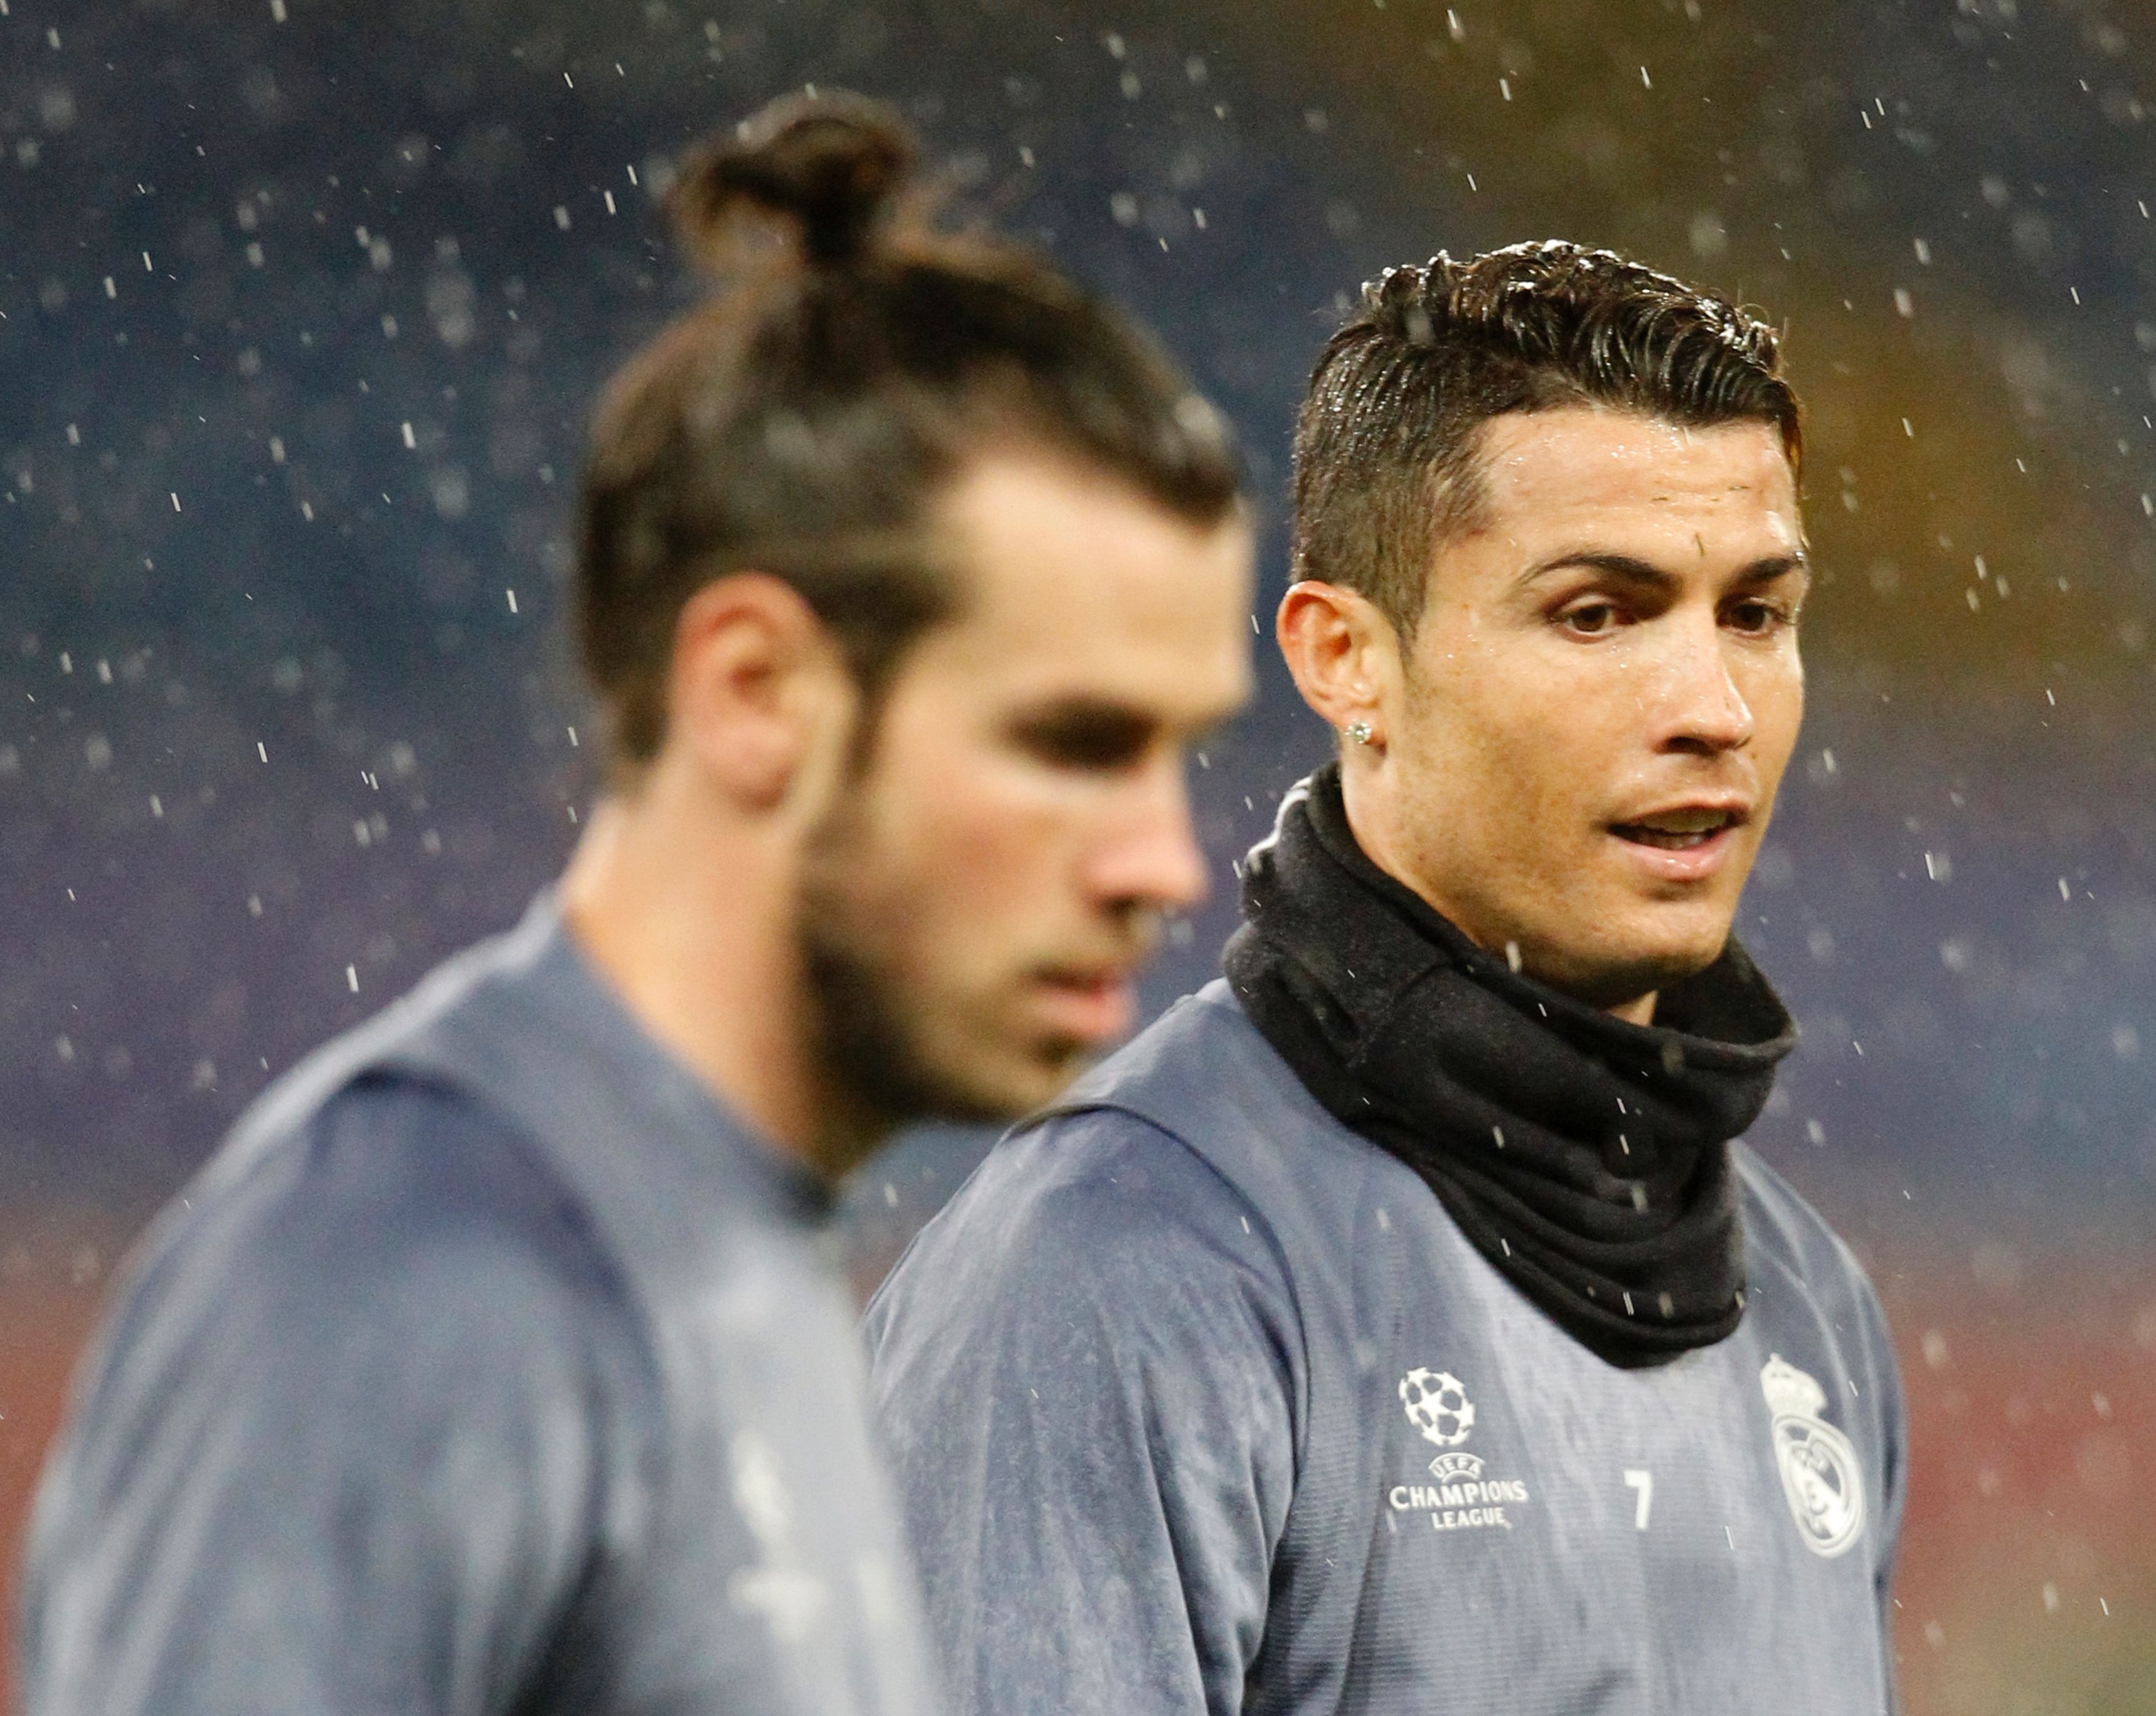 Real Madrid's Portuguese forward Cristiano Ronaldo (R) and Real Madrid's Welsh forward Gareth Bale attend a training session under heavy rain on the eve of the Champions League football match Napoli vs Real Madrid on March 6, 2017 at the San Paolo stadium in Naples. / AFP PHOTO / CARLO HERMANN        (Photo credit should read CARLO HERMANN/AFP/Getty Images)